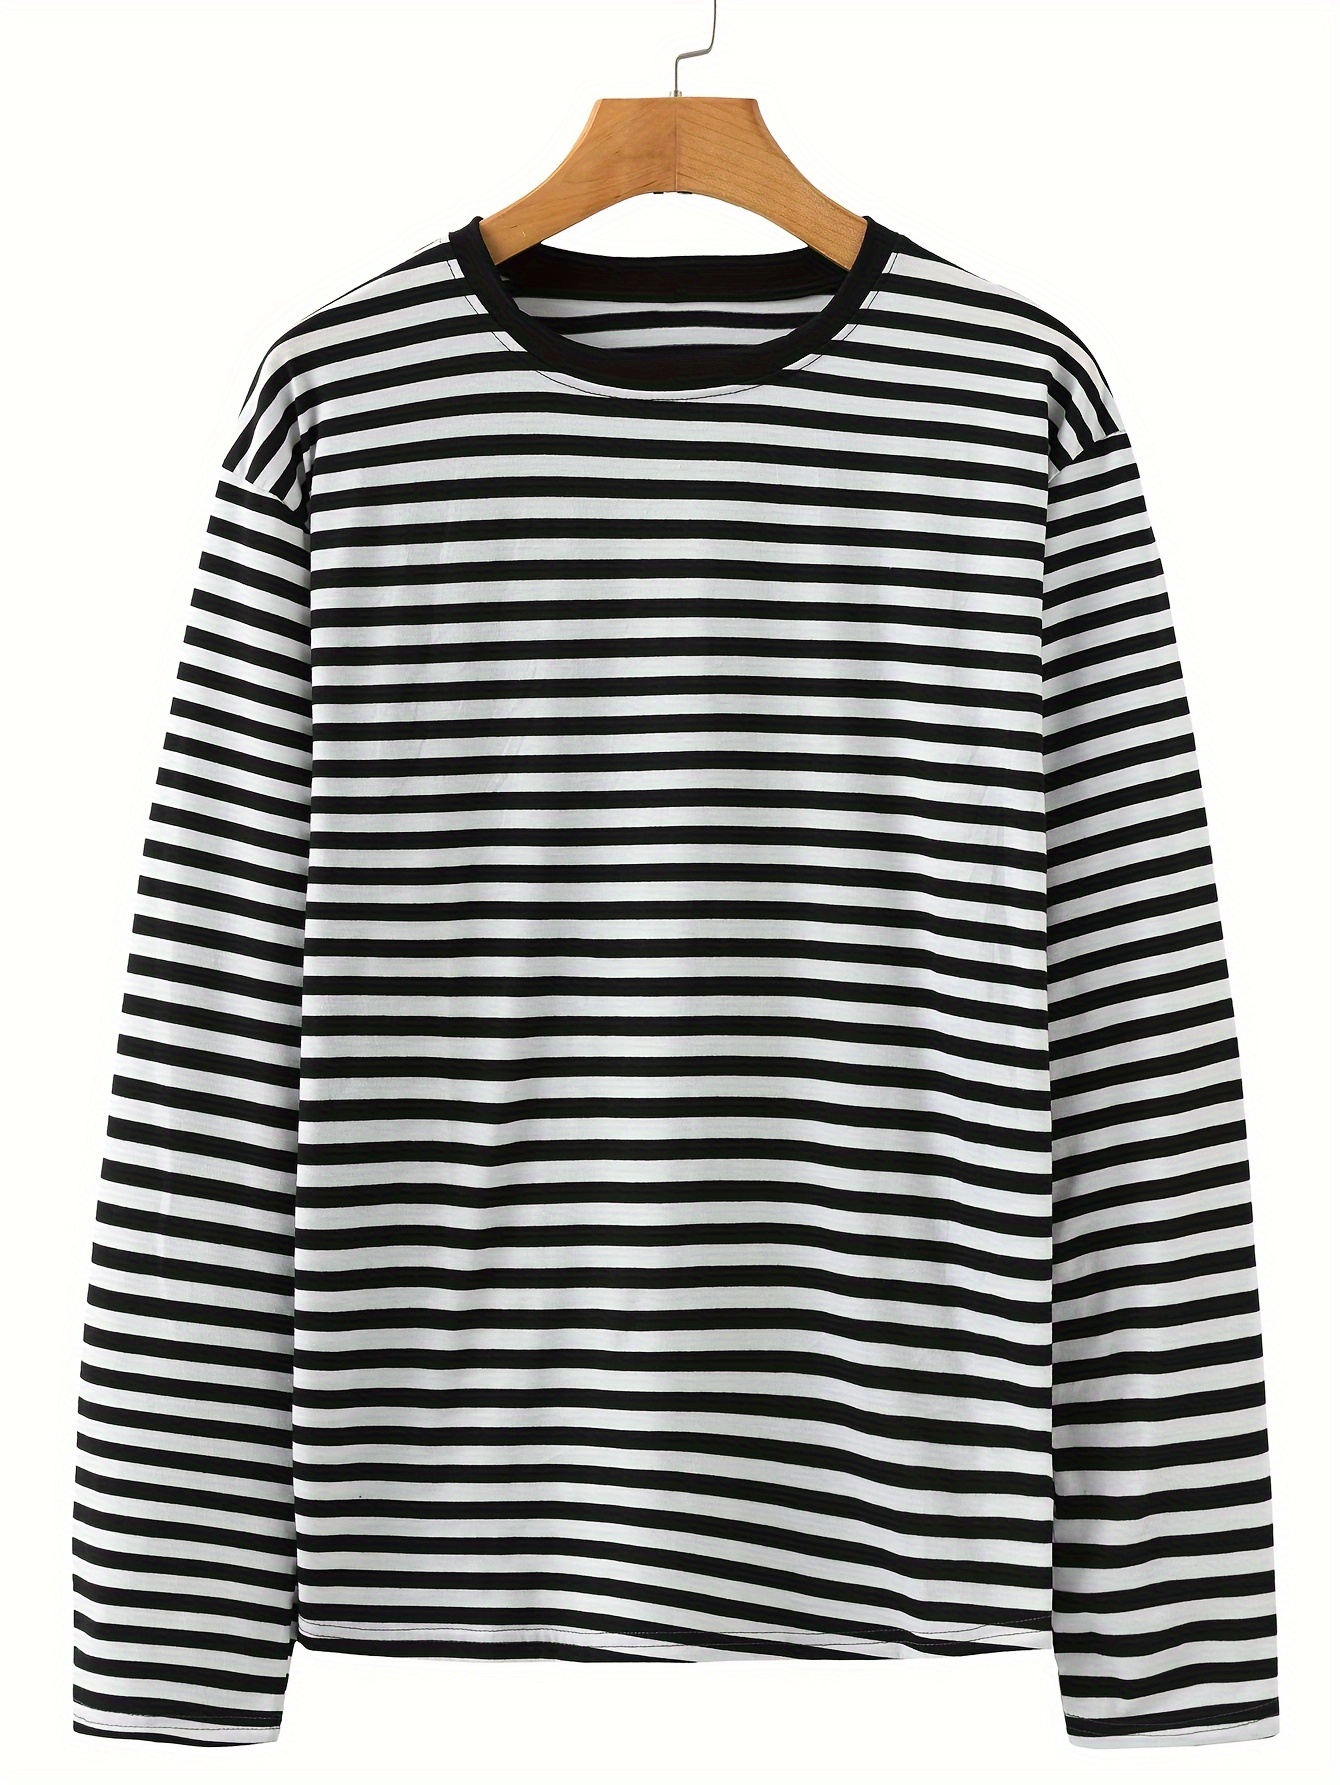 casual striped mens all match long sleeve crew neck t shirt for spring fall details 3